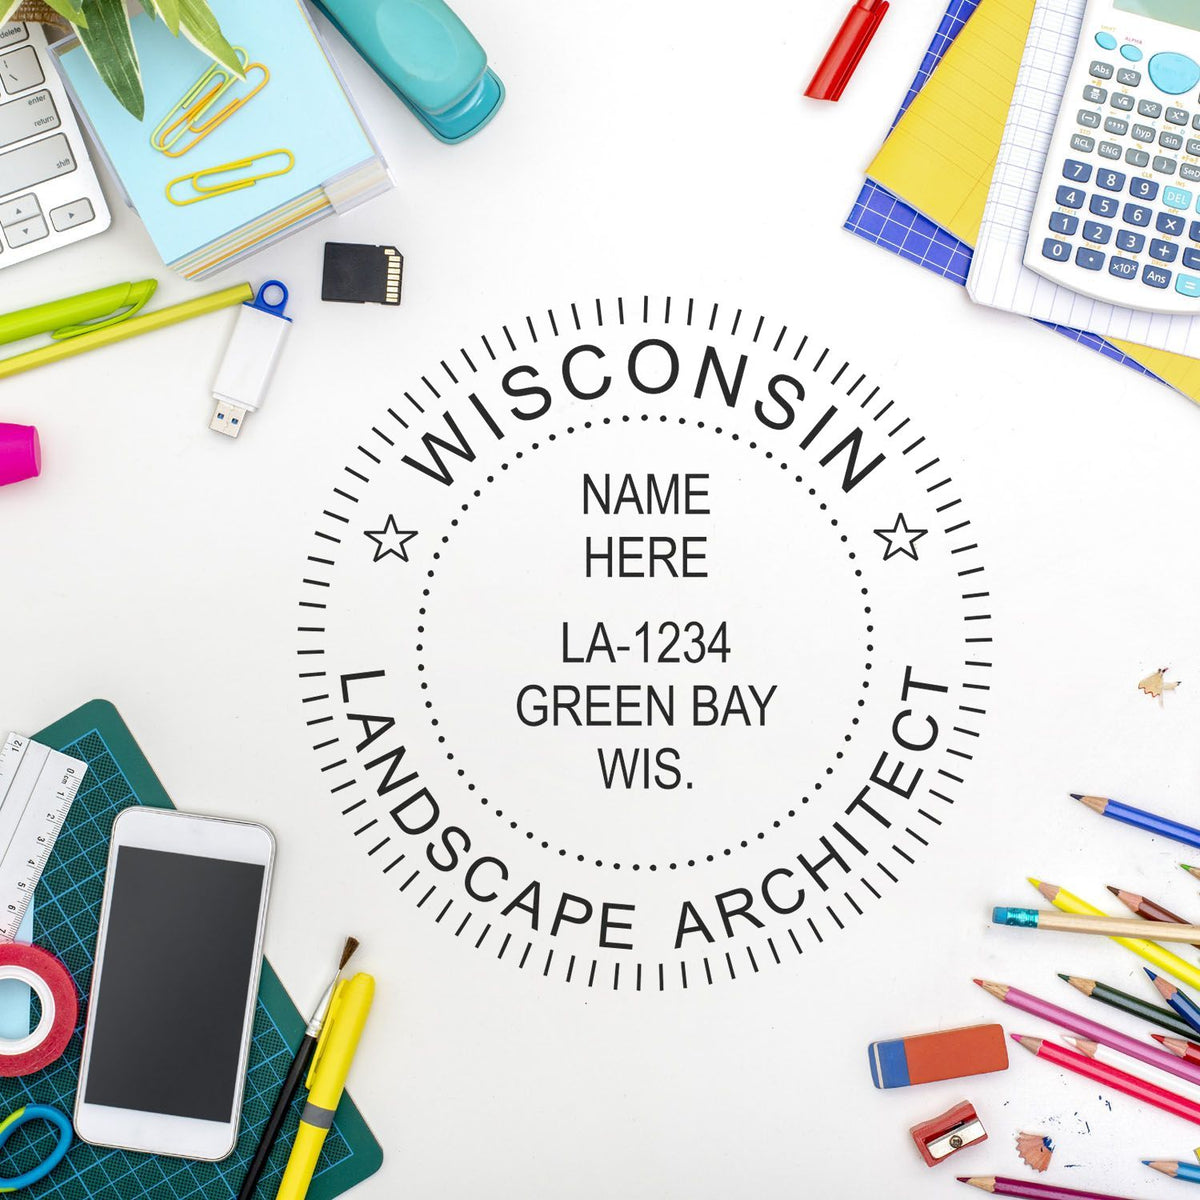 A lifestyle photo showing a stamped image of the Digital Wisconsin Landscape Architect Stamp on a piece of paper